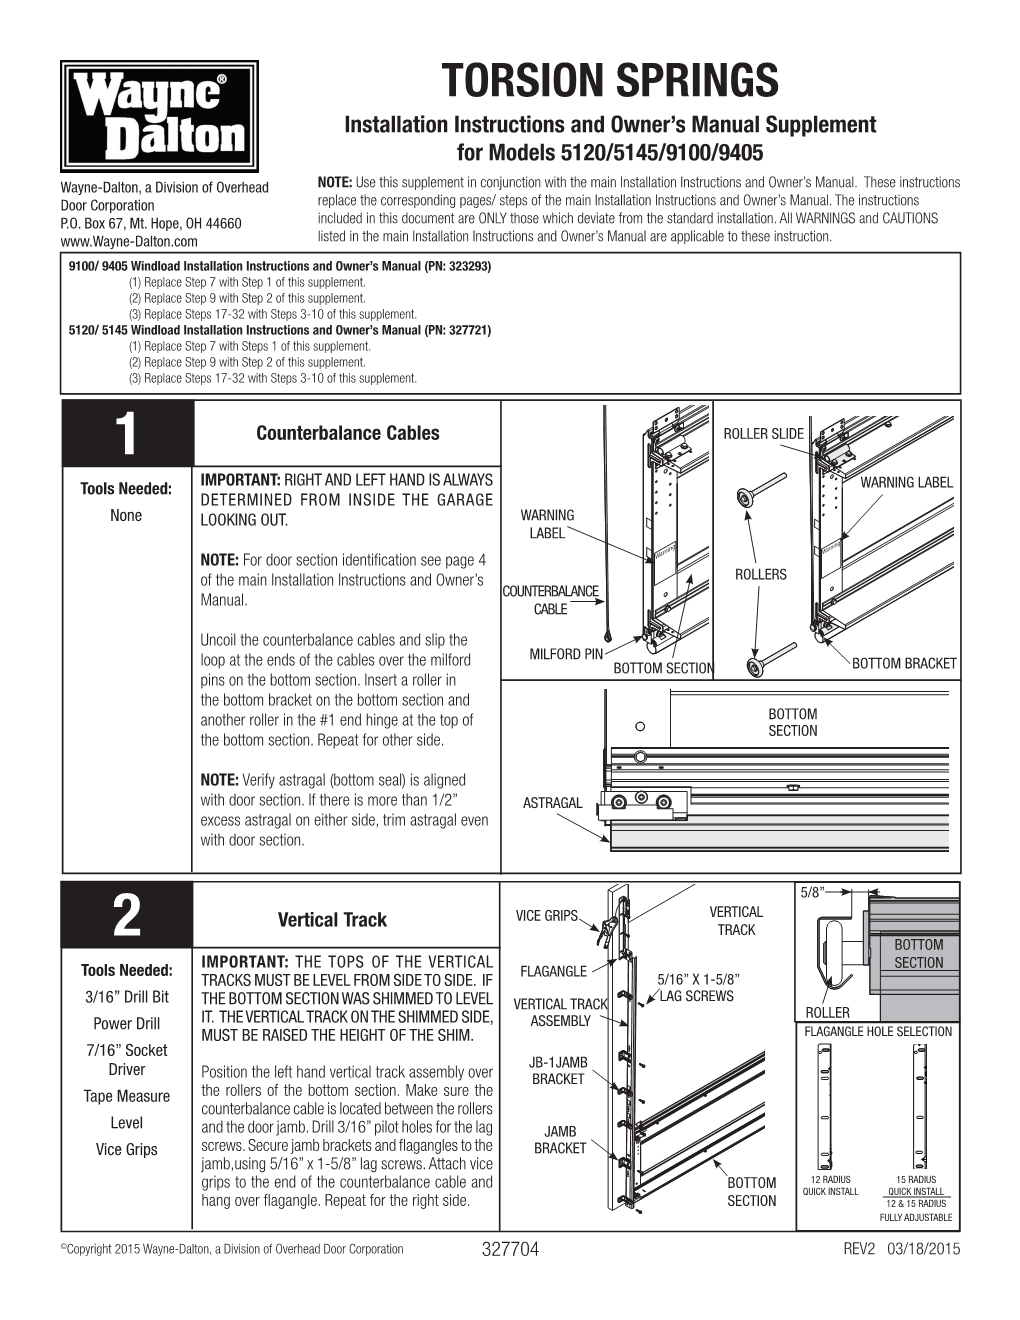 TORSION SPRINGS Installation Instructions and Owner’S Manual Supplement for Models 5120/5145/9100/9405